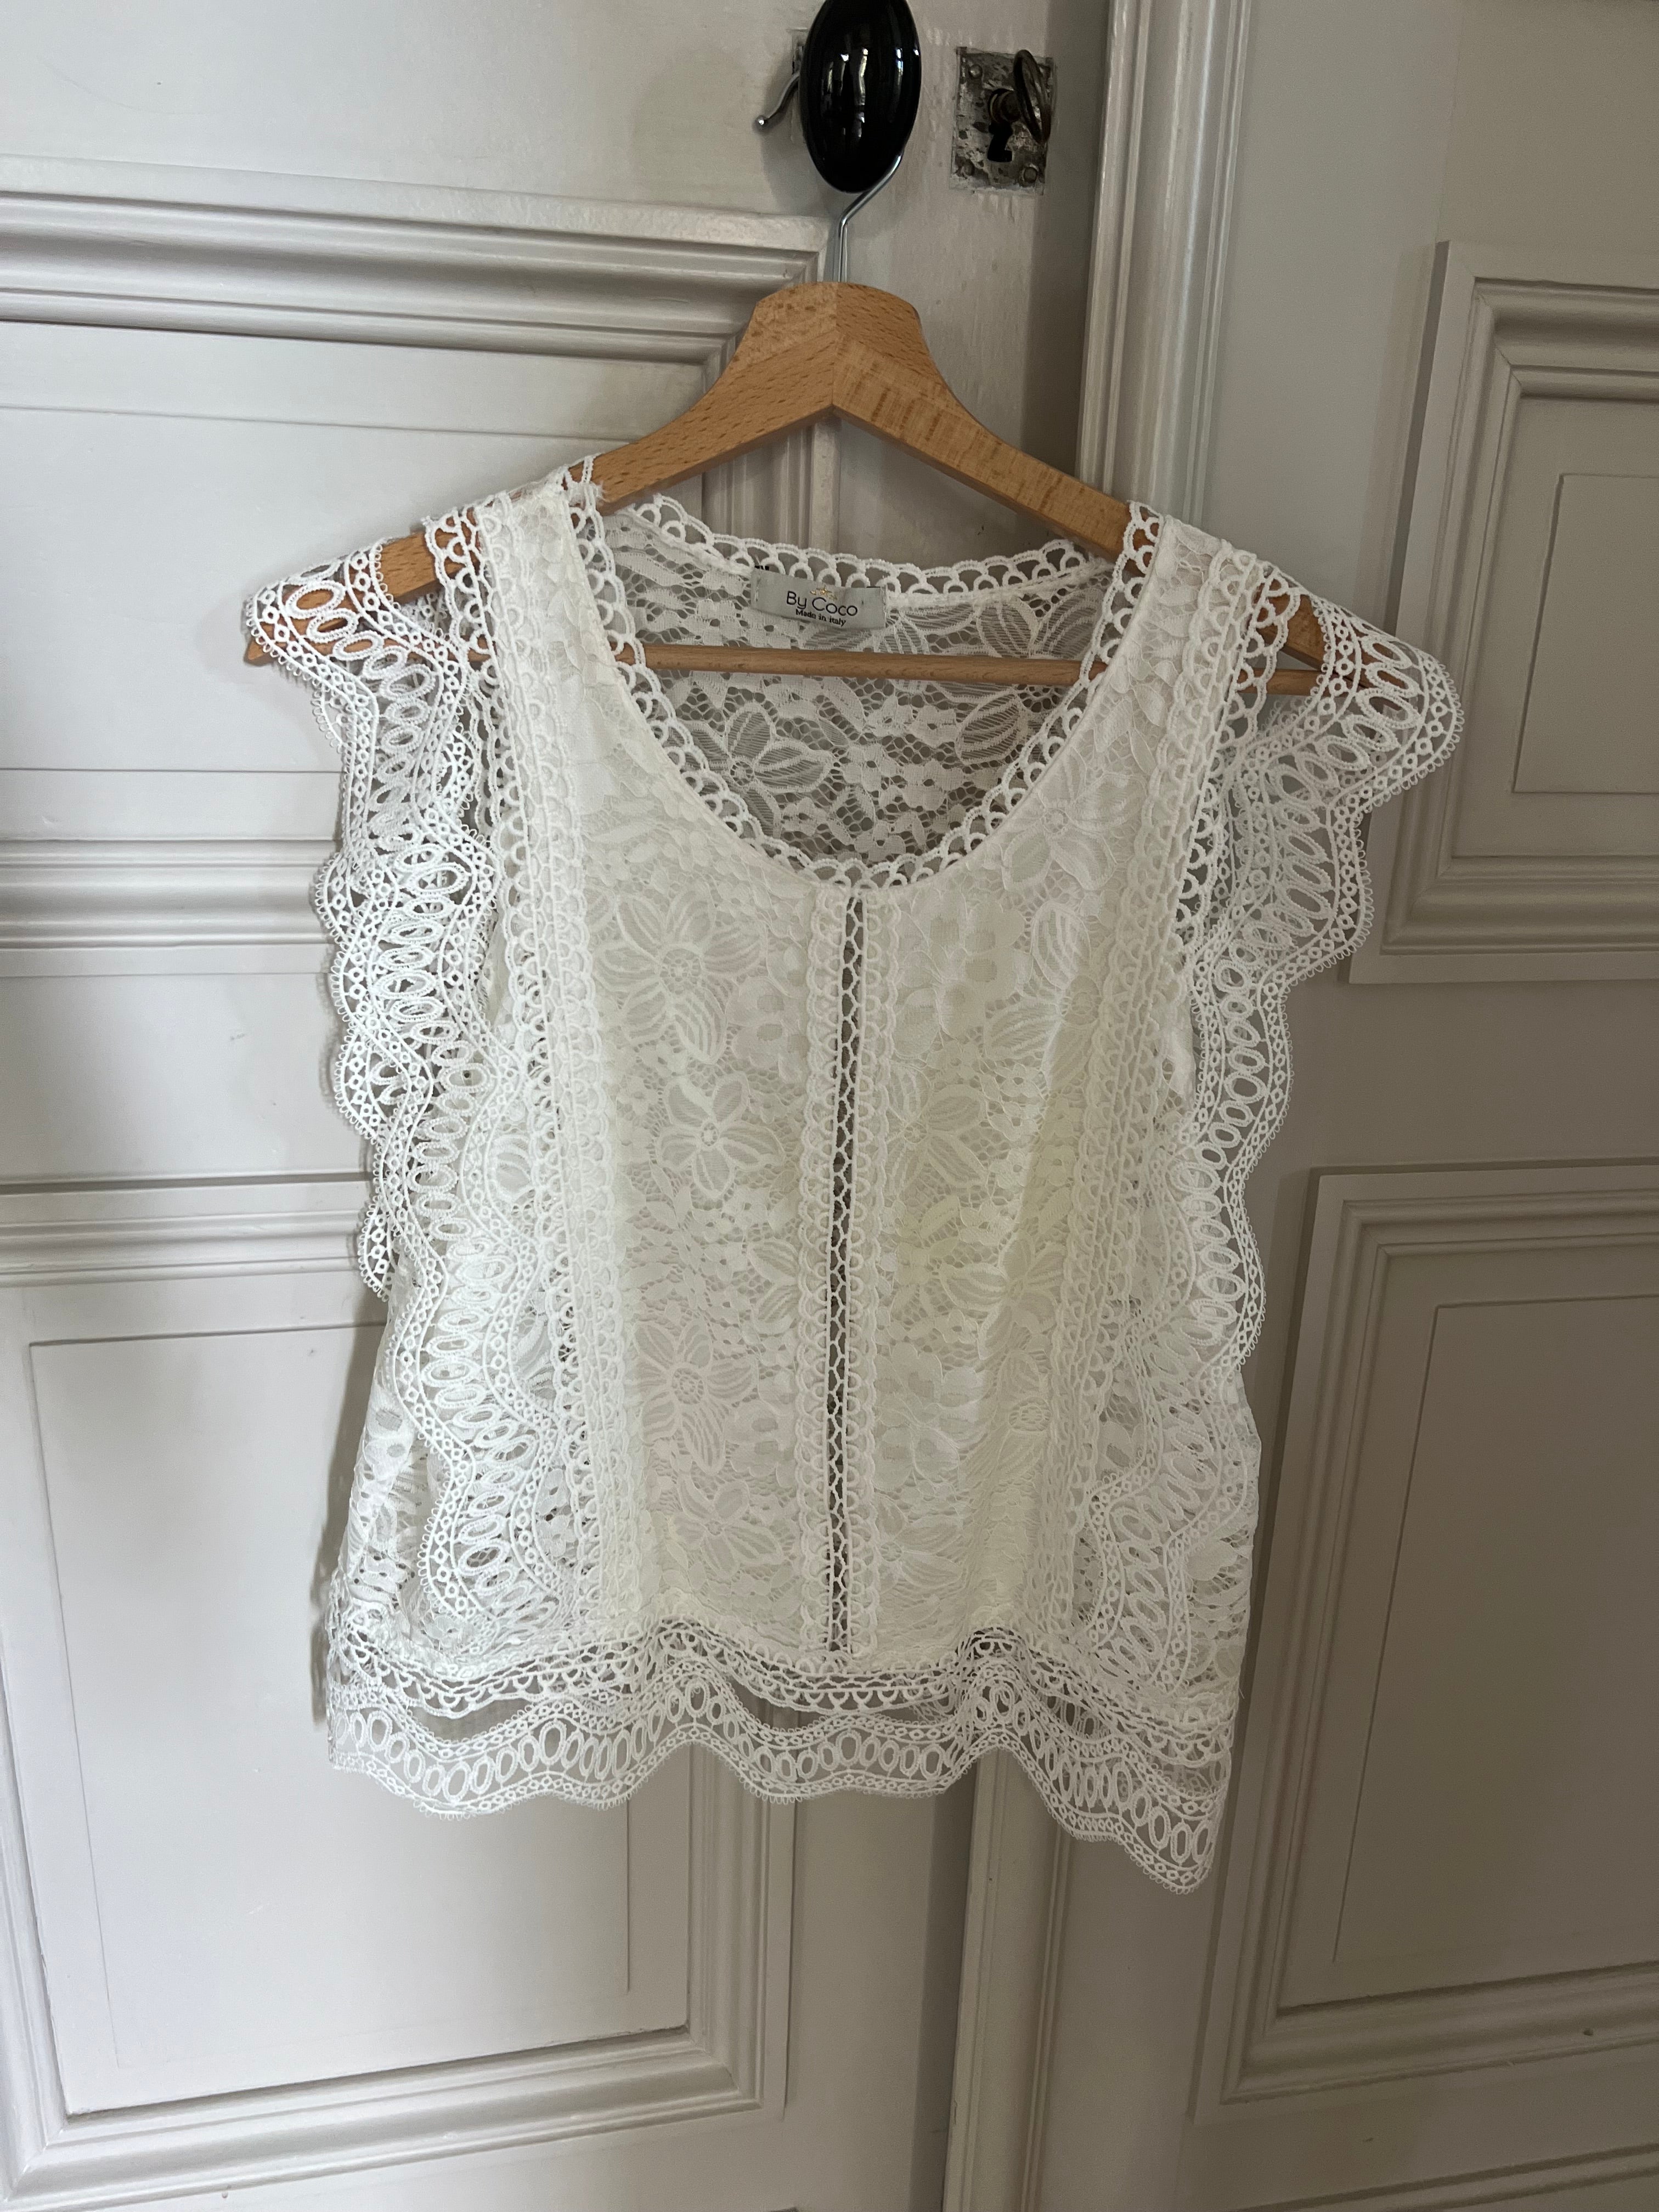 Haut By Coco blanc avec broderie